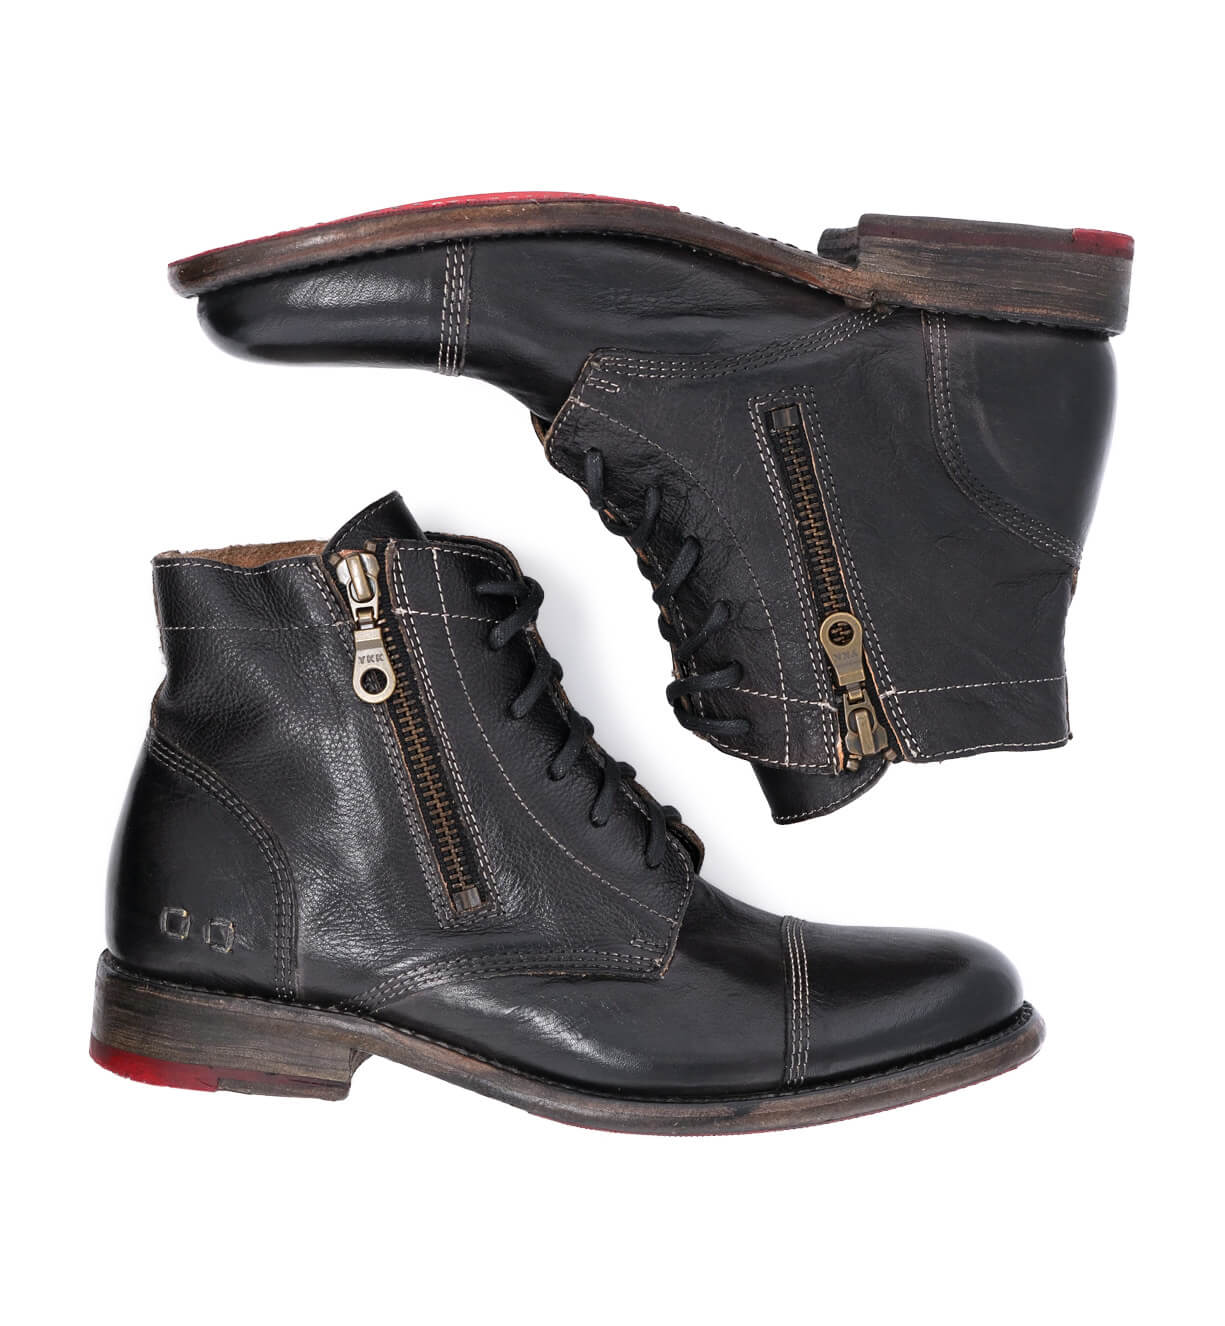 A pair of Bonnie lace-up combat ankle boots with red soles from Bed Stu.